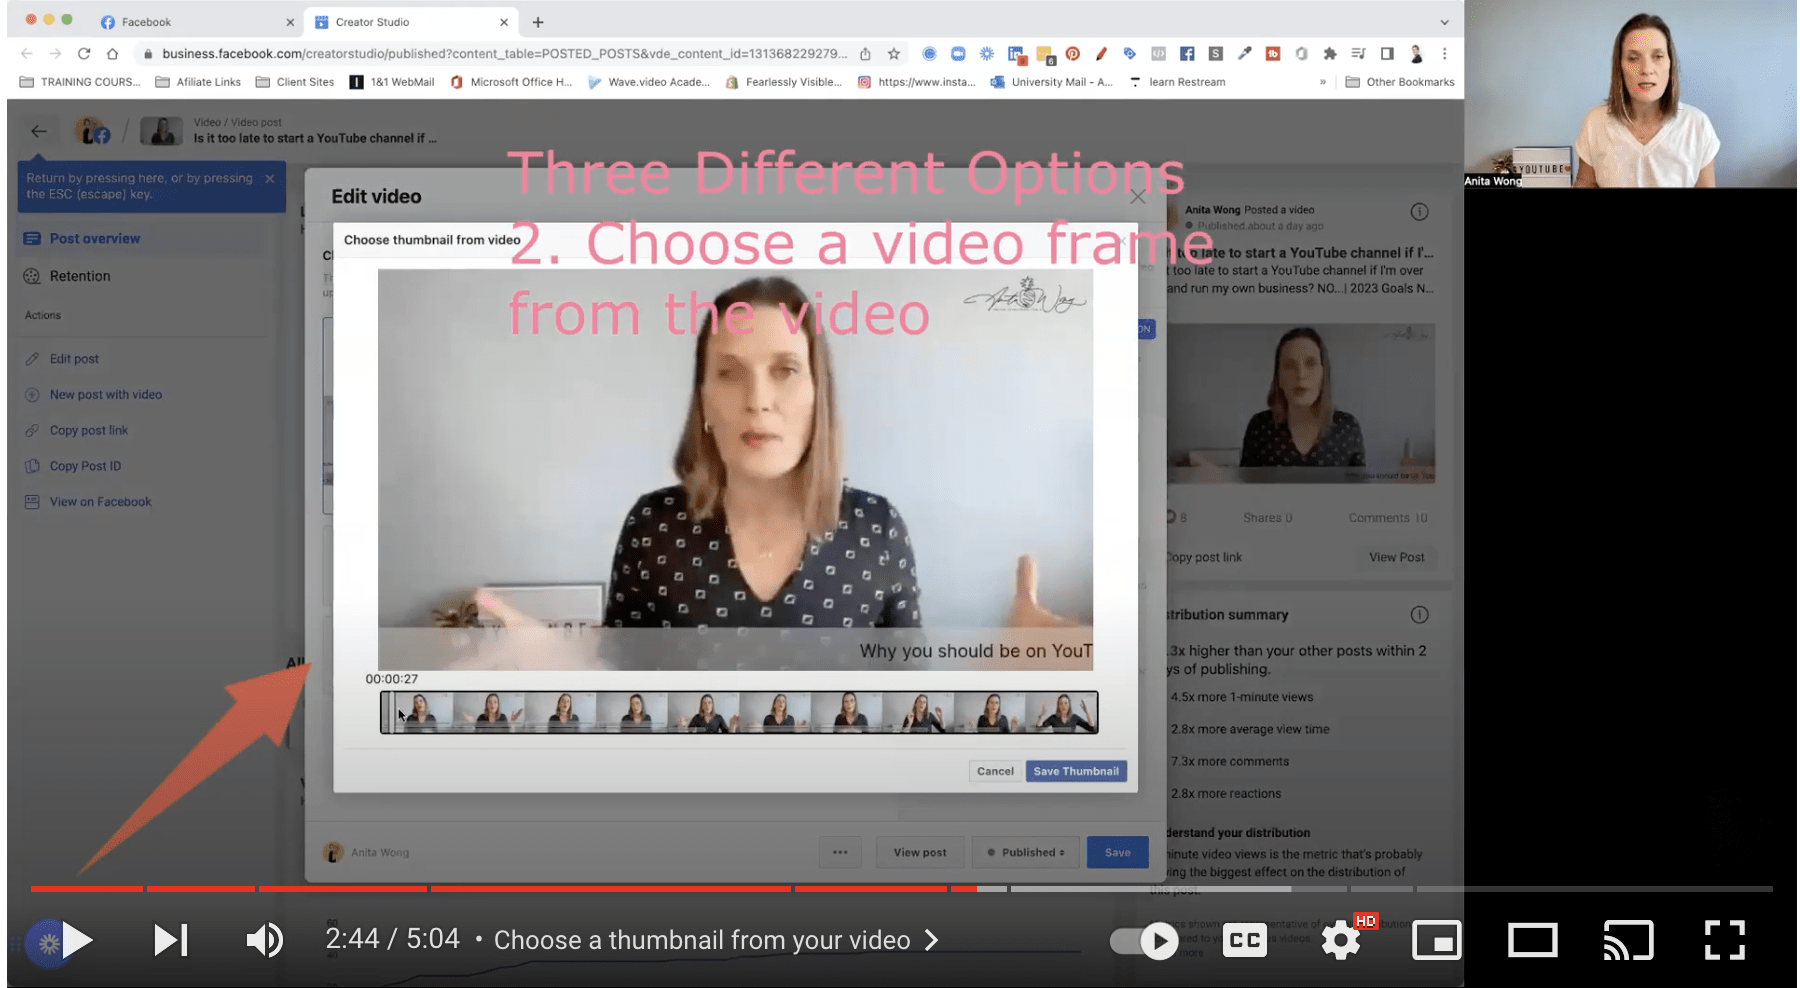 Choose a video Facebook thumbnail from the video frames